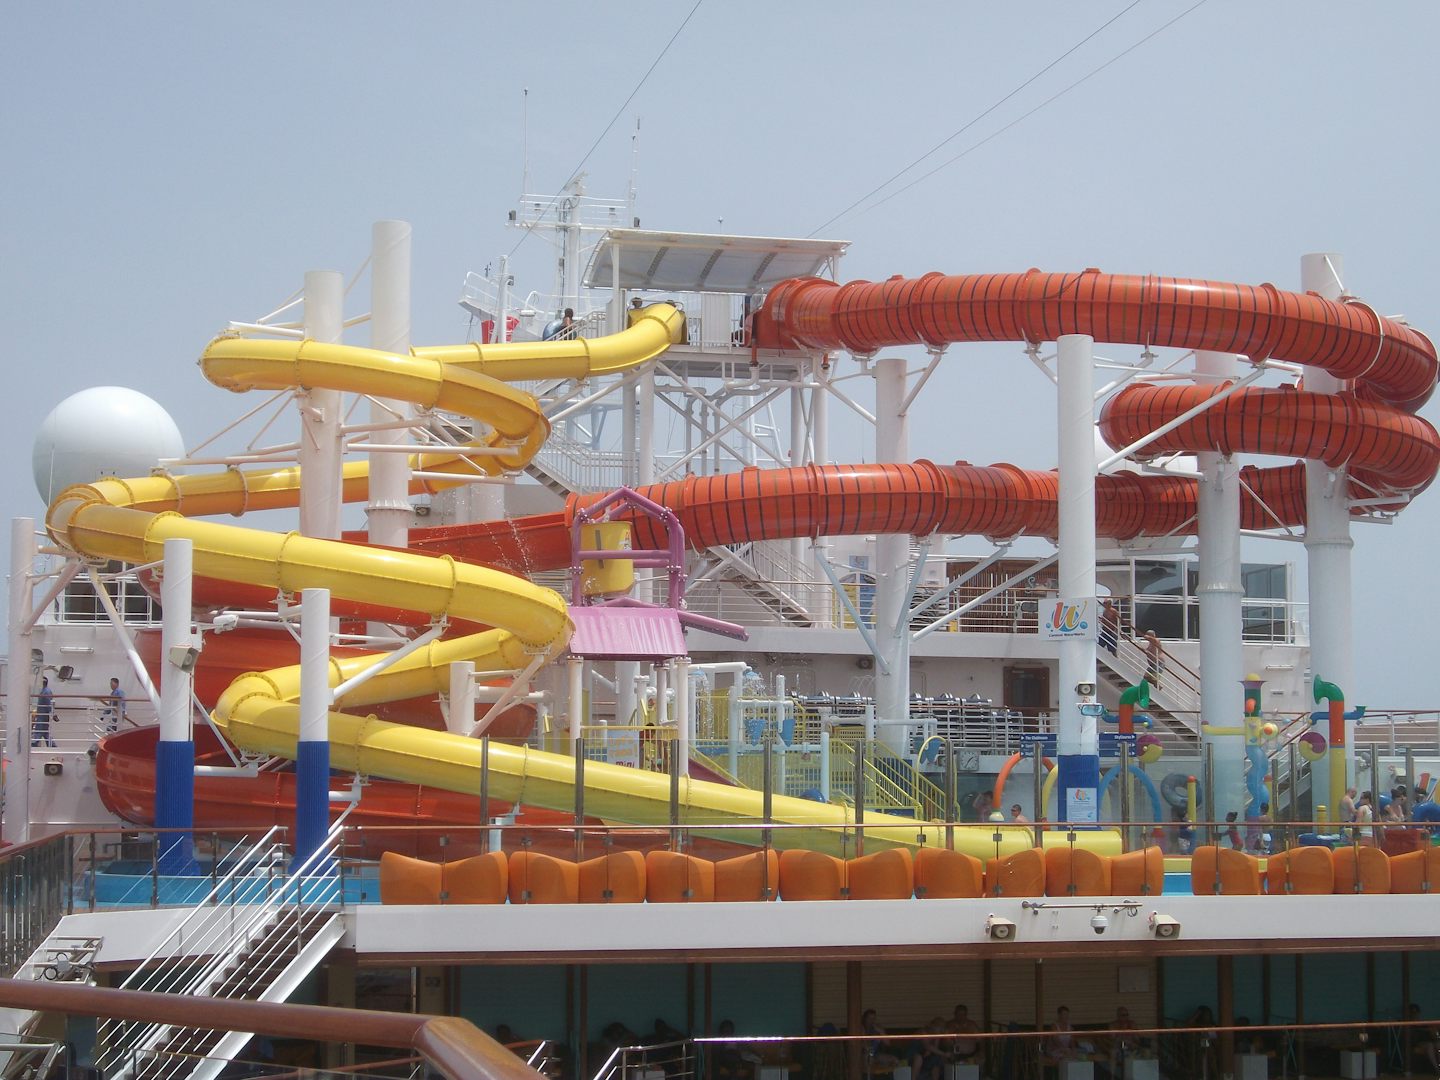 Water slides (didn't get a chance to try these)